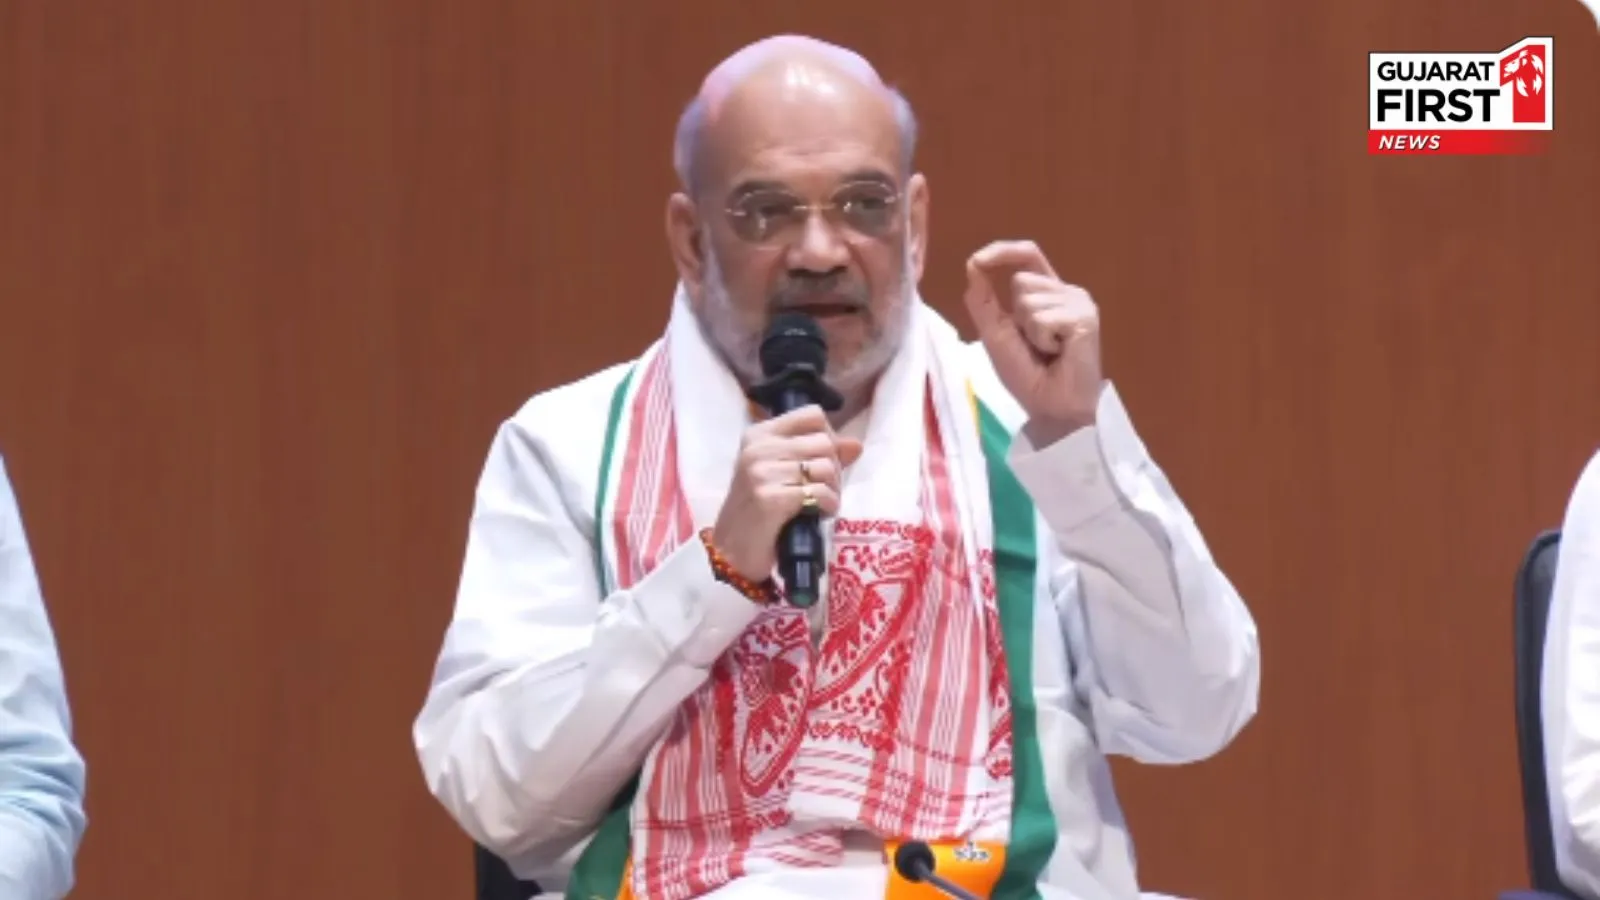 Union Home Minister Amit Shah press conference regarding Fake Video, told the whole truth